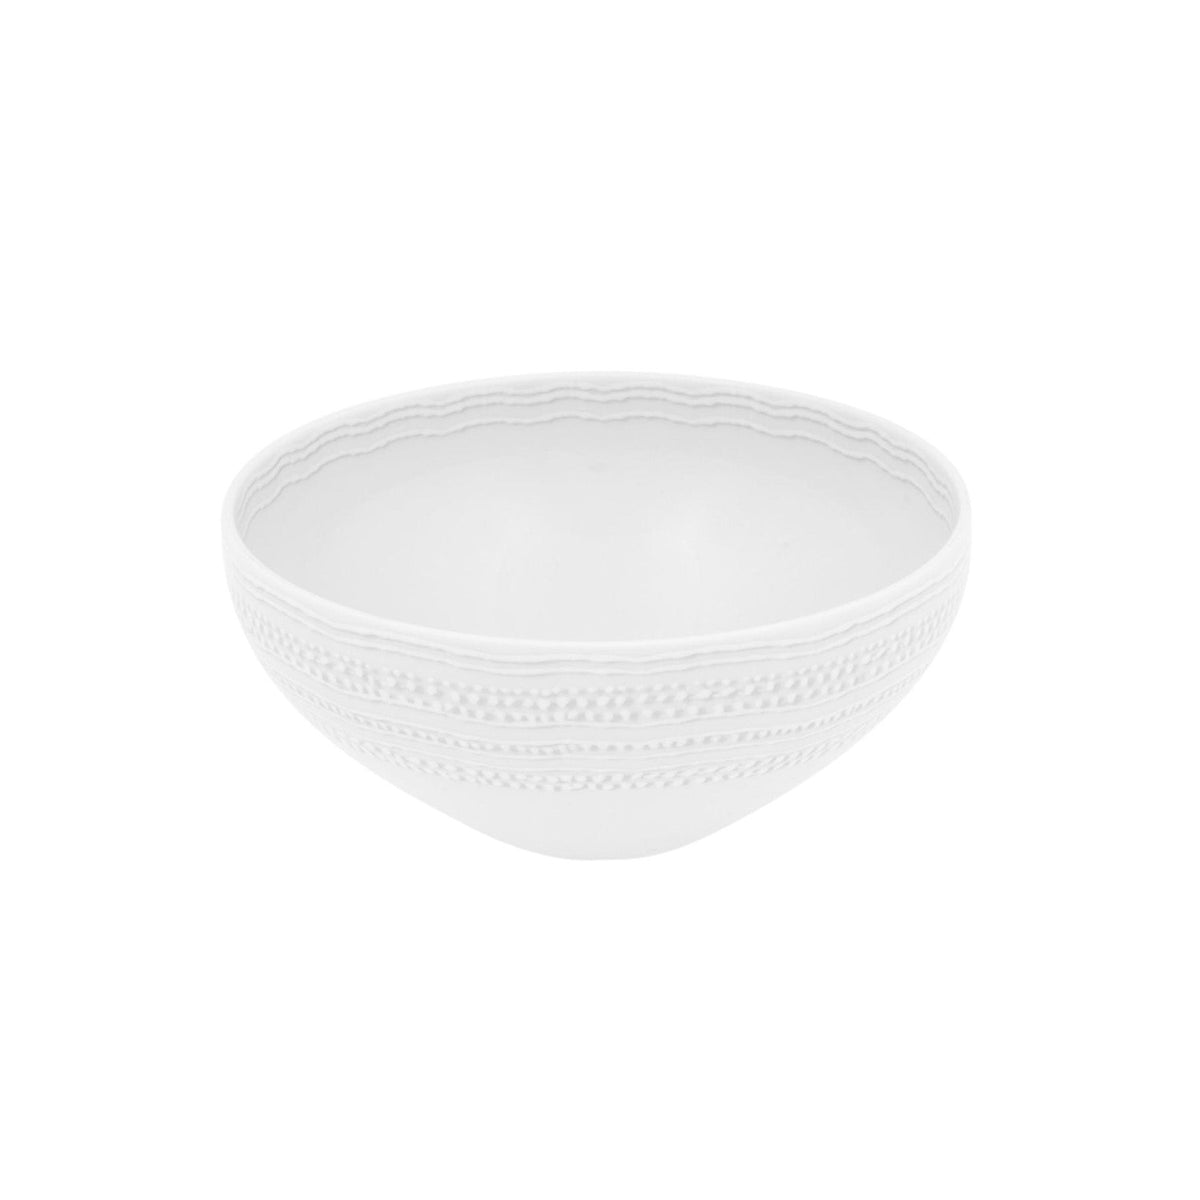 Mar Cereal Bowl